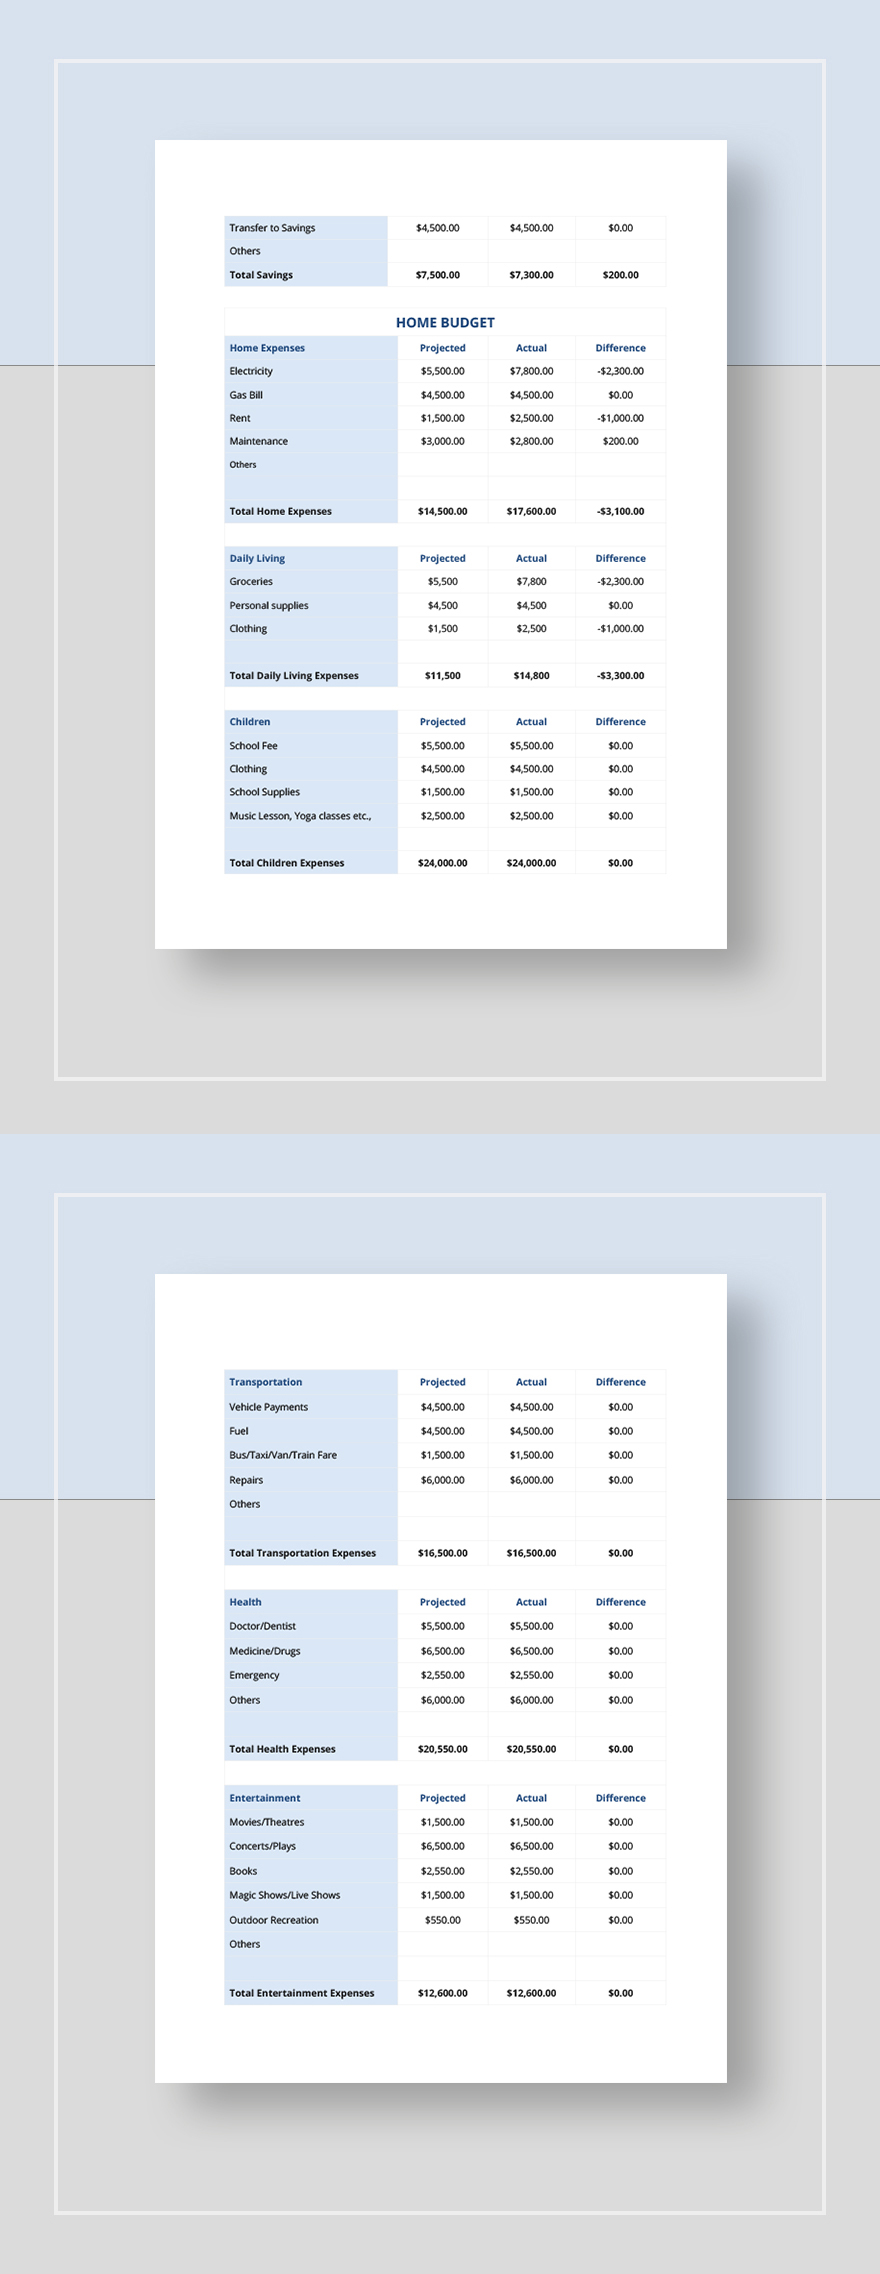 Monthly Expense Sheet Template